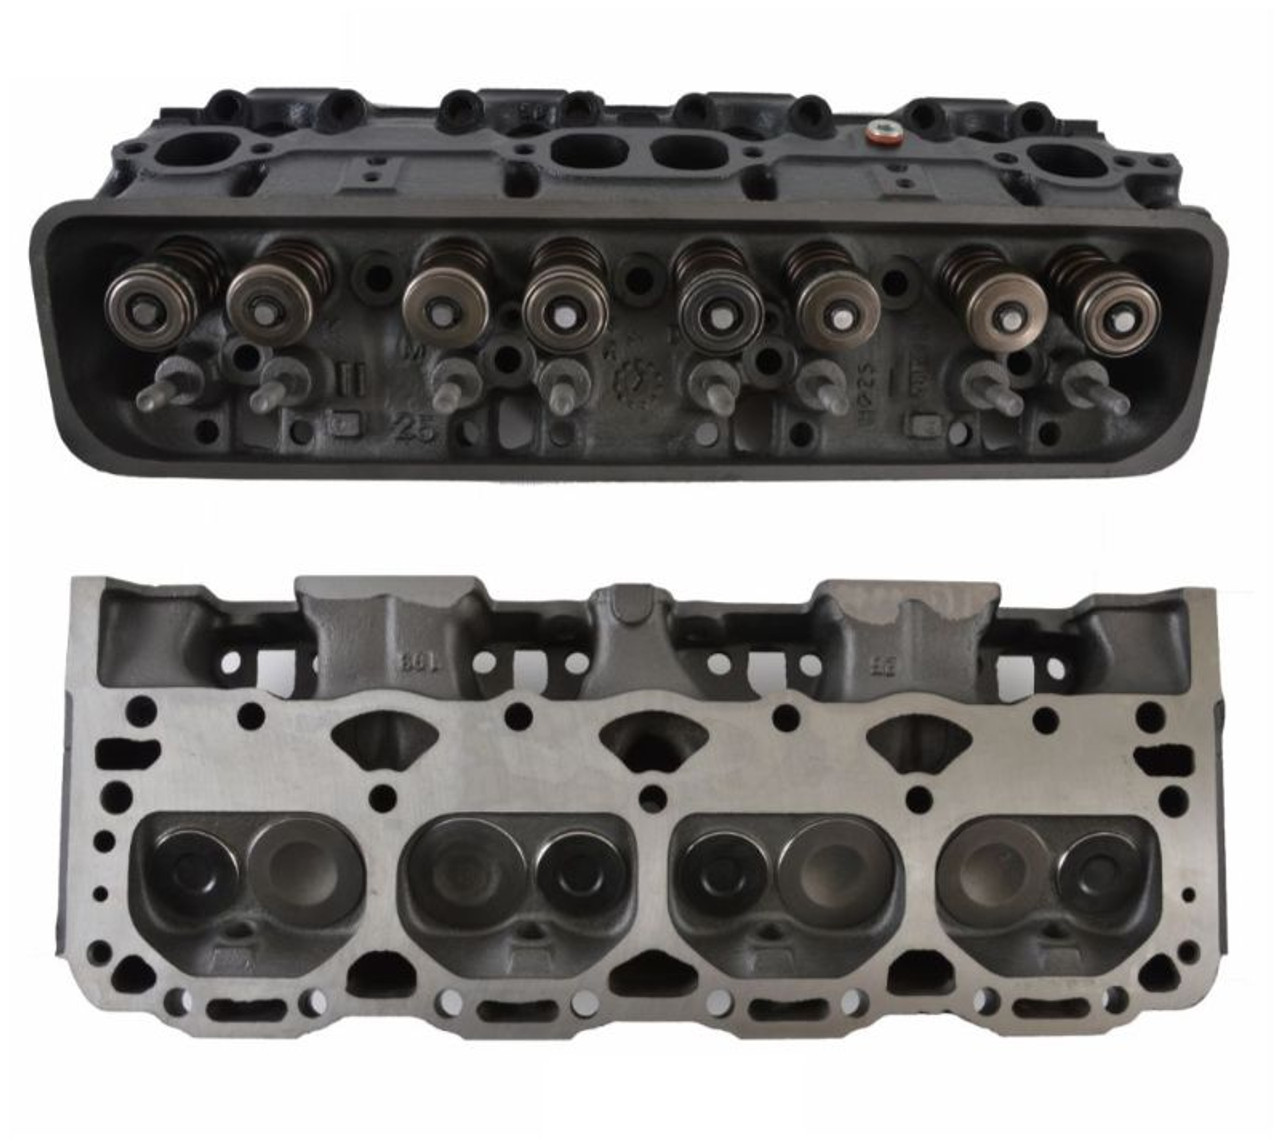 Cylinder Head Assembly - 1996 Chevrolet Express 2500 5.7L (CH1065R.K292)